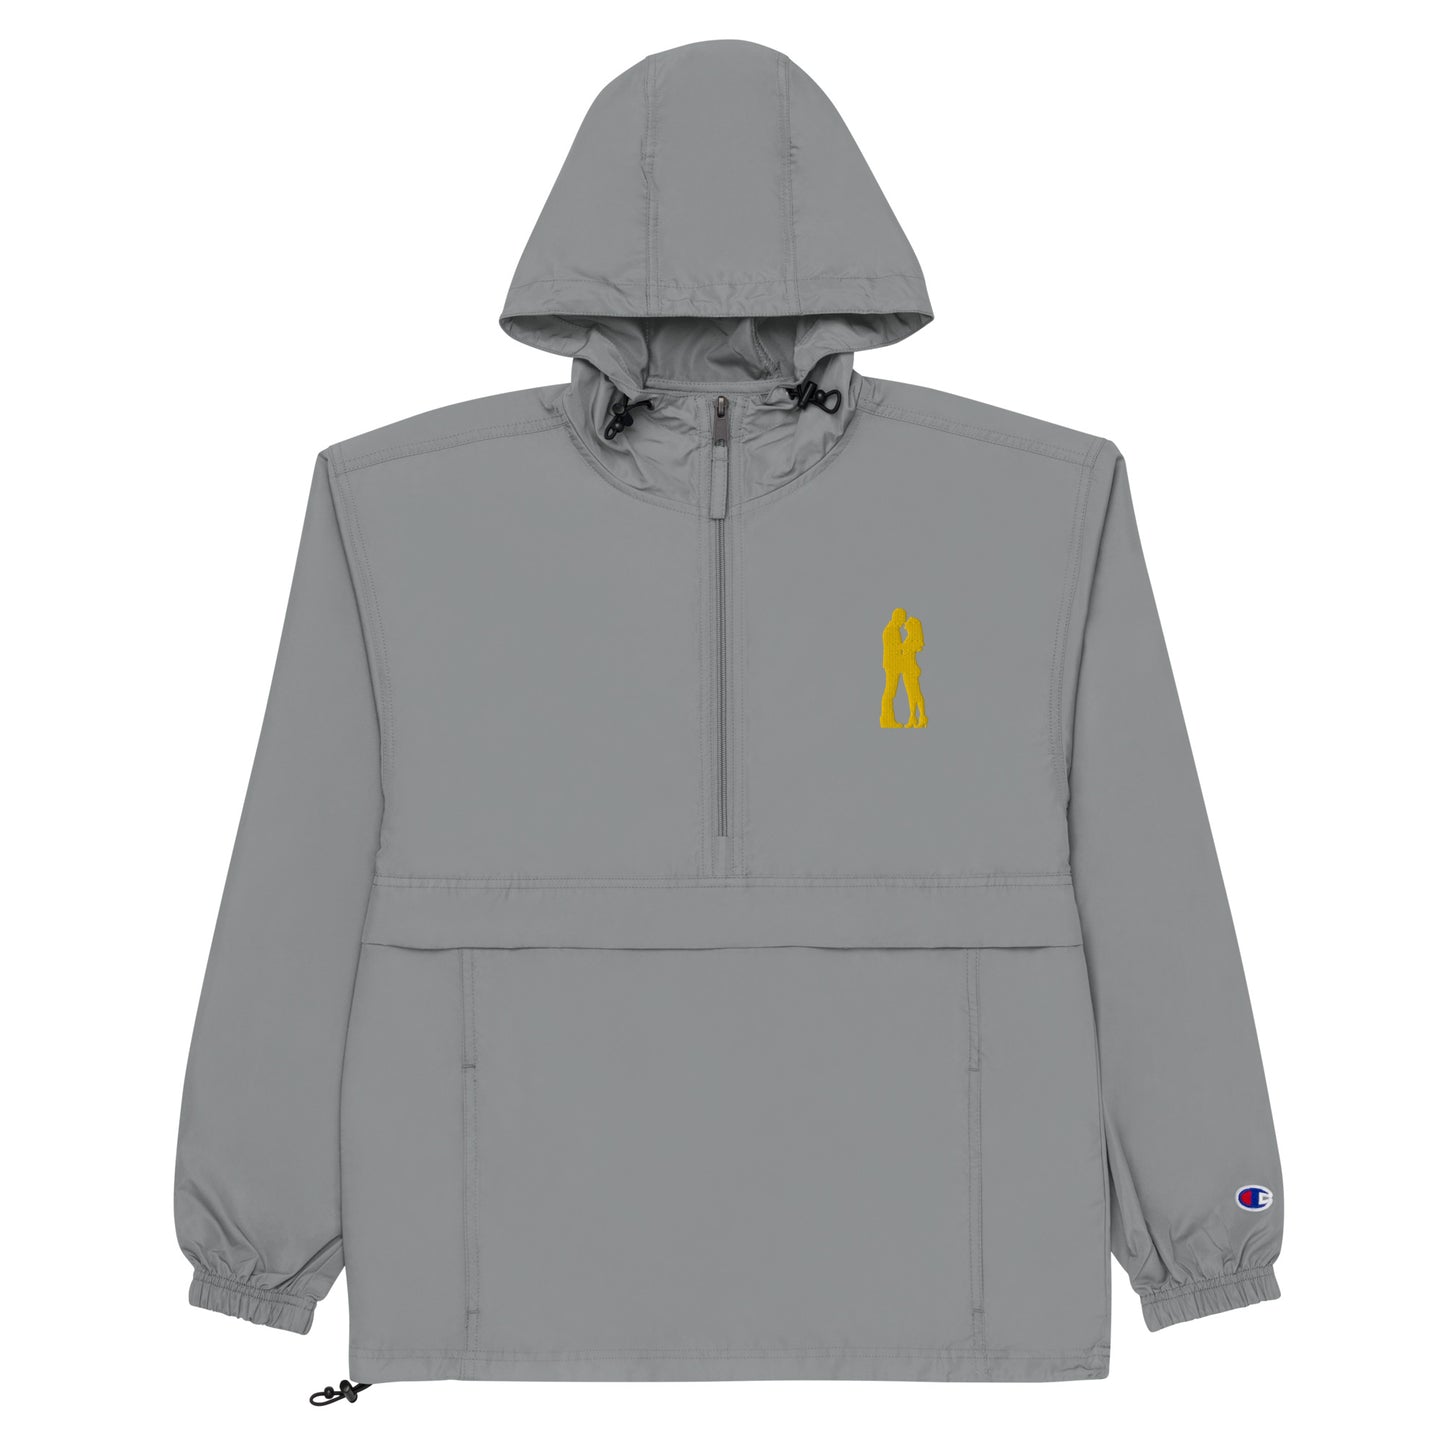 INTIMACY Embroidered Champion Jacket